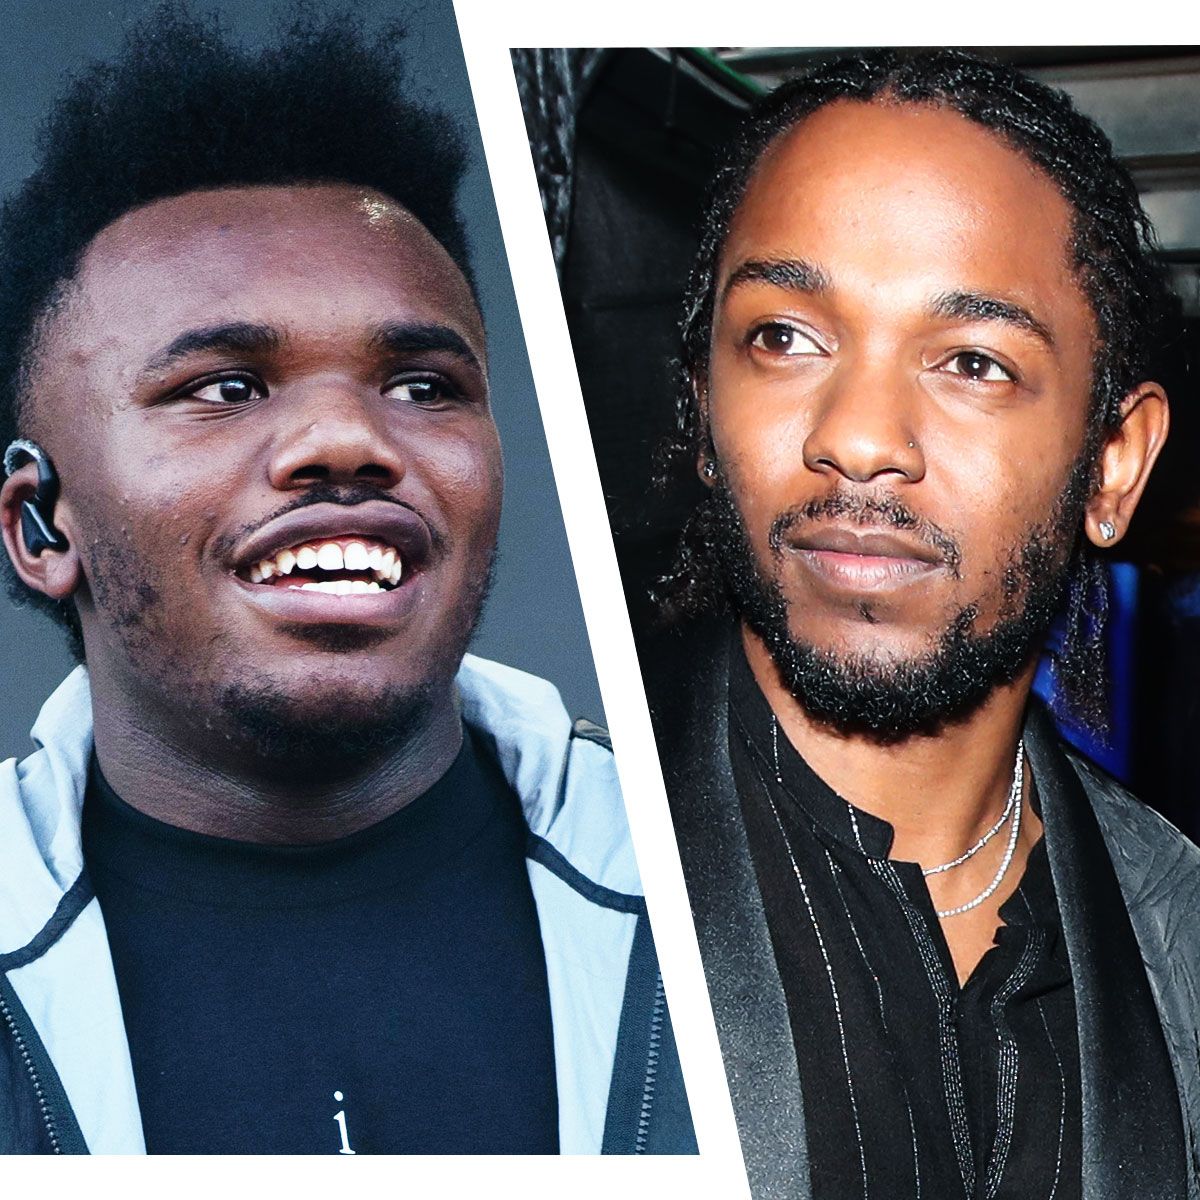 Kendrick Lamar links up with Baby Keem once again on new track 'Range  Brothers